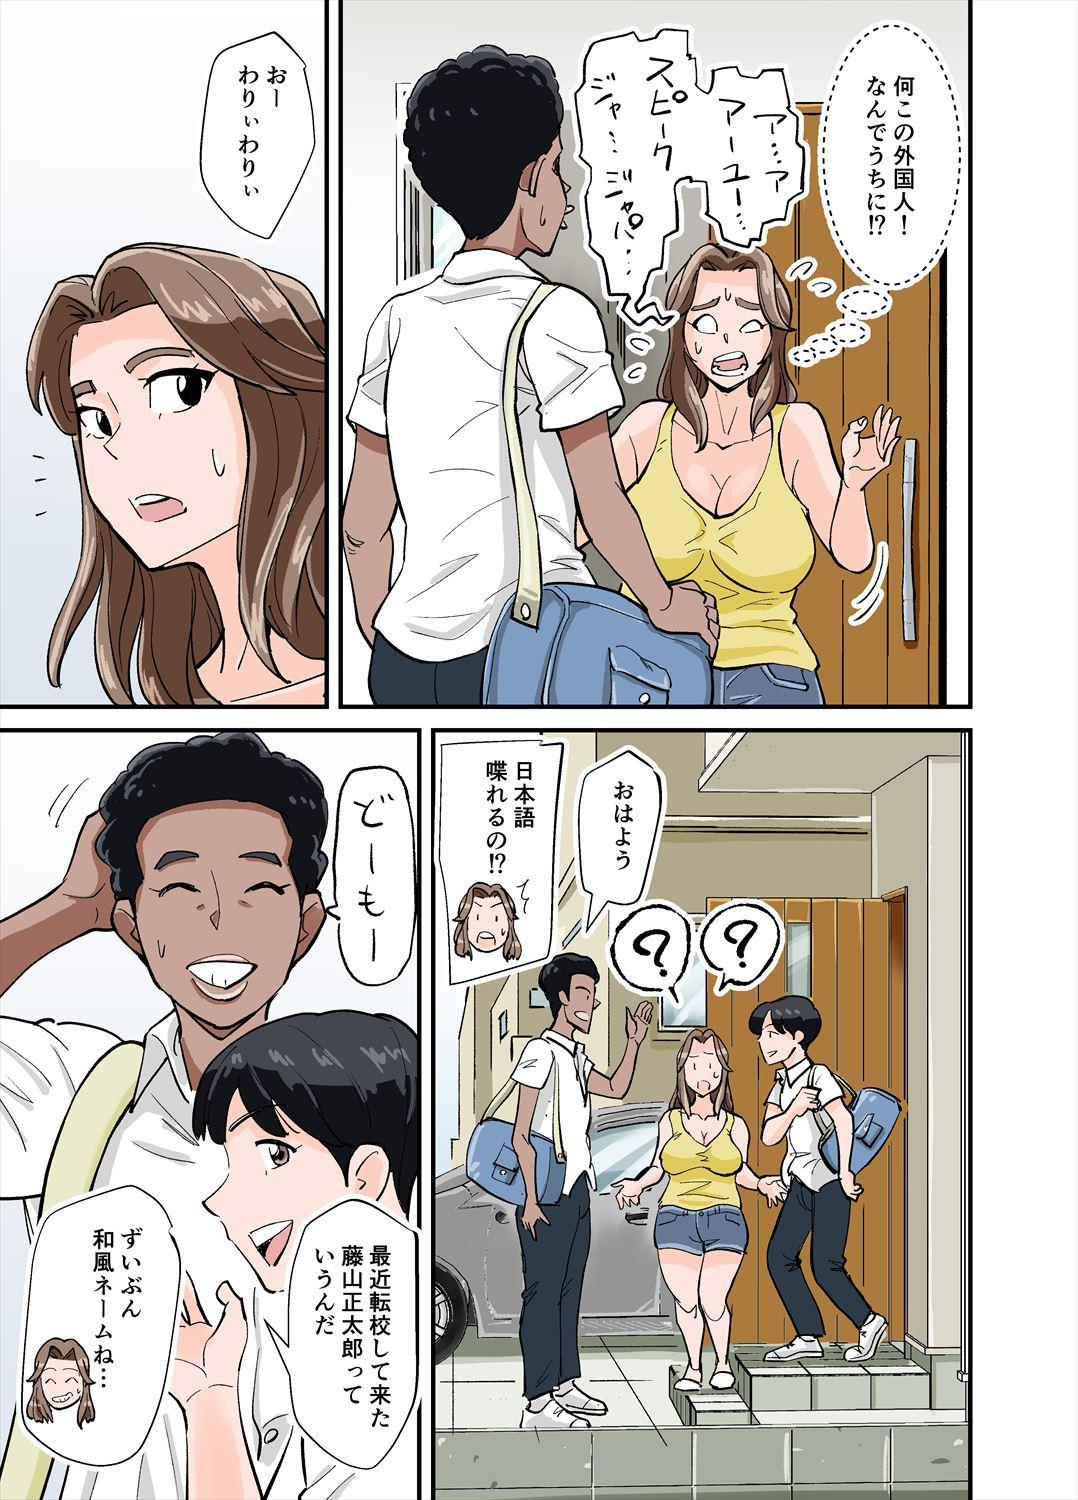 4some アントニー - Original Hot Blow Jobs - Page 4